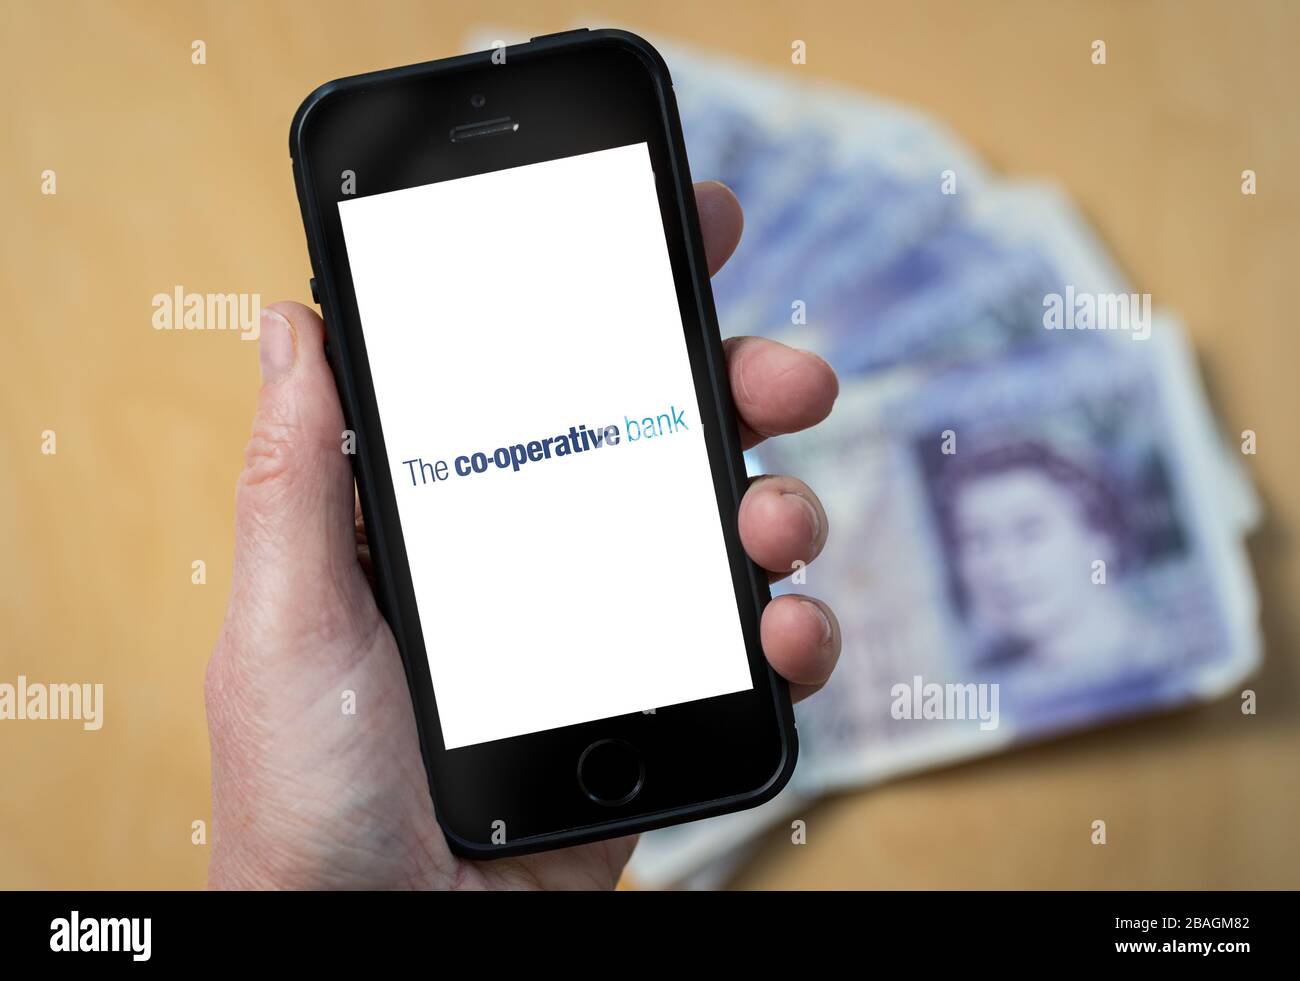 A woman looking at the The Co-operative Bank logo on a mobile phone. (editorial Use Only) Stock Photo